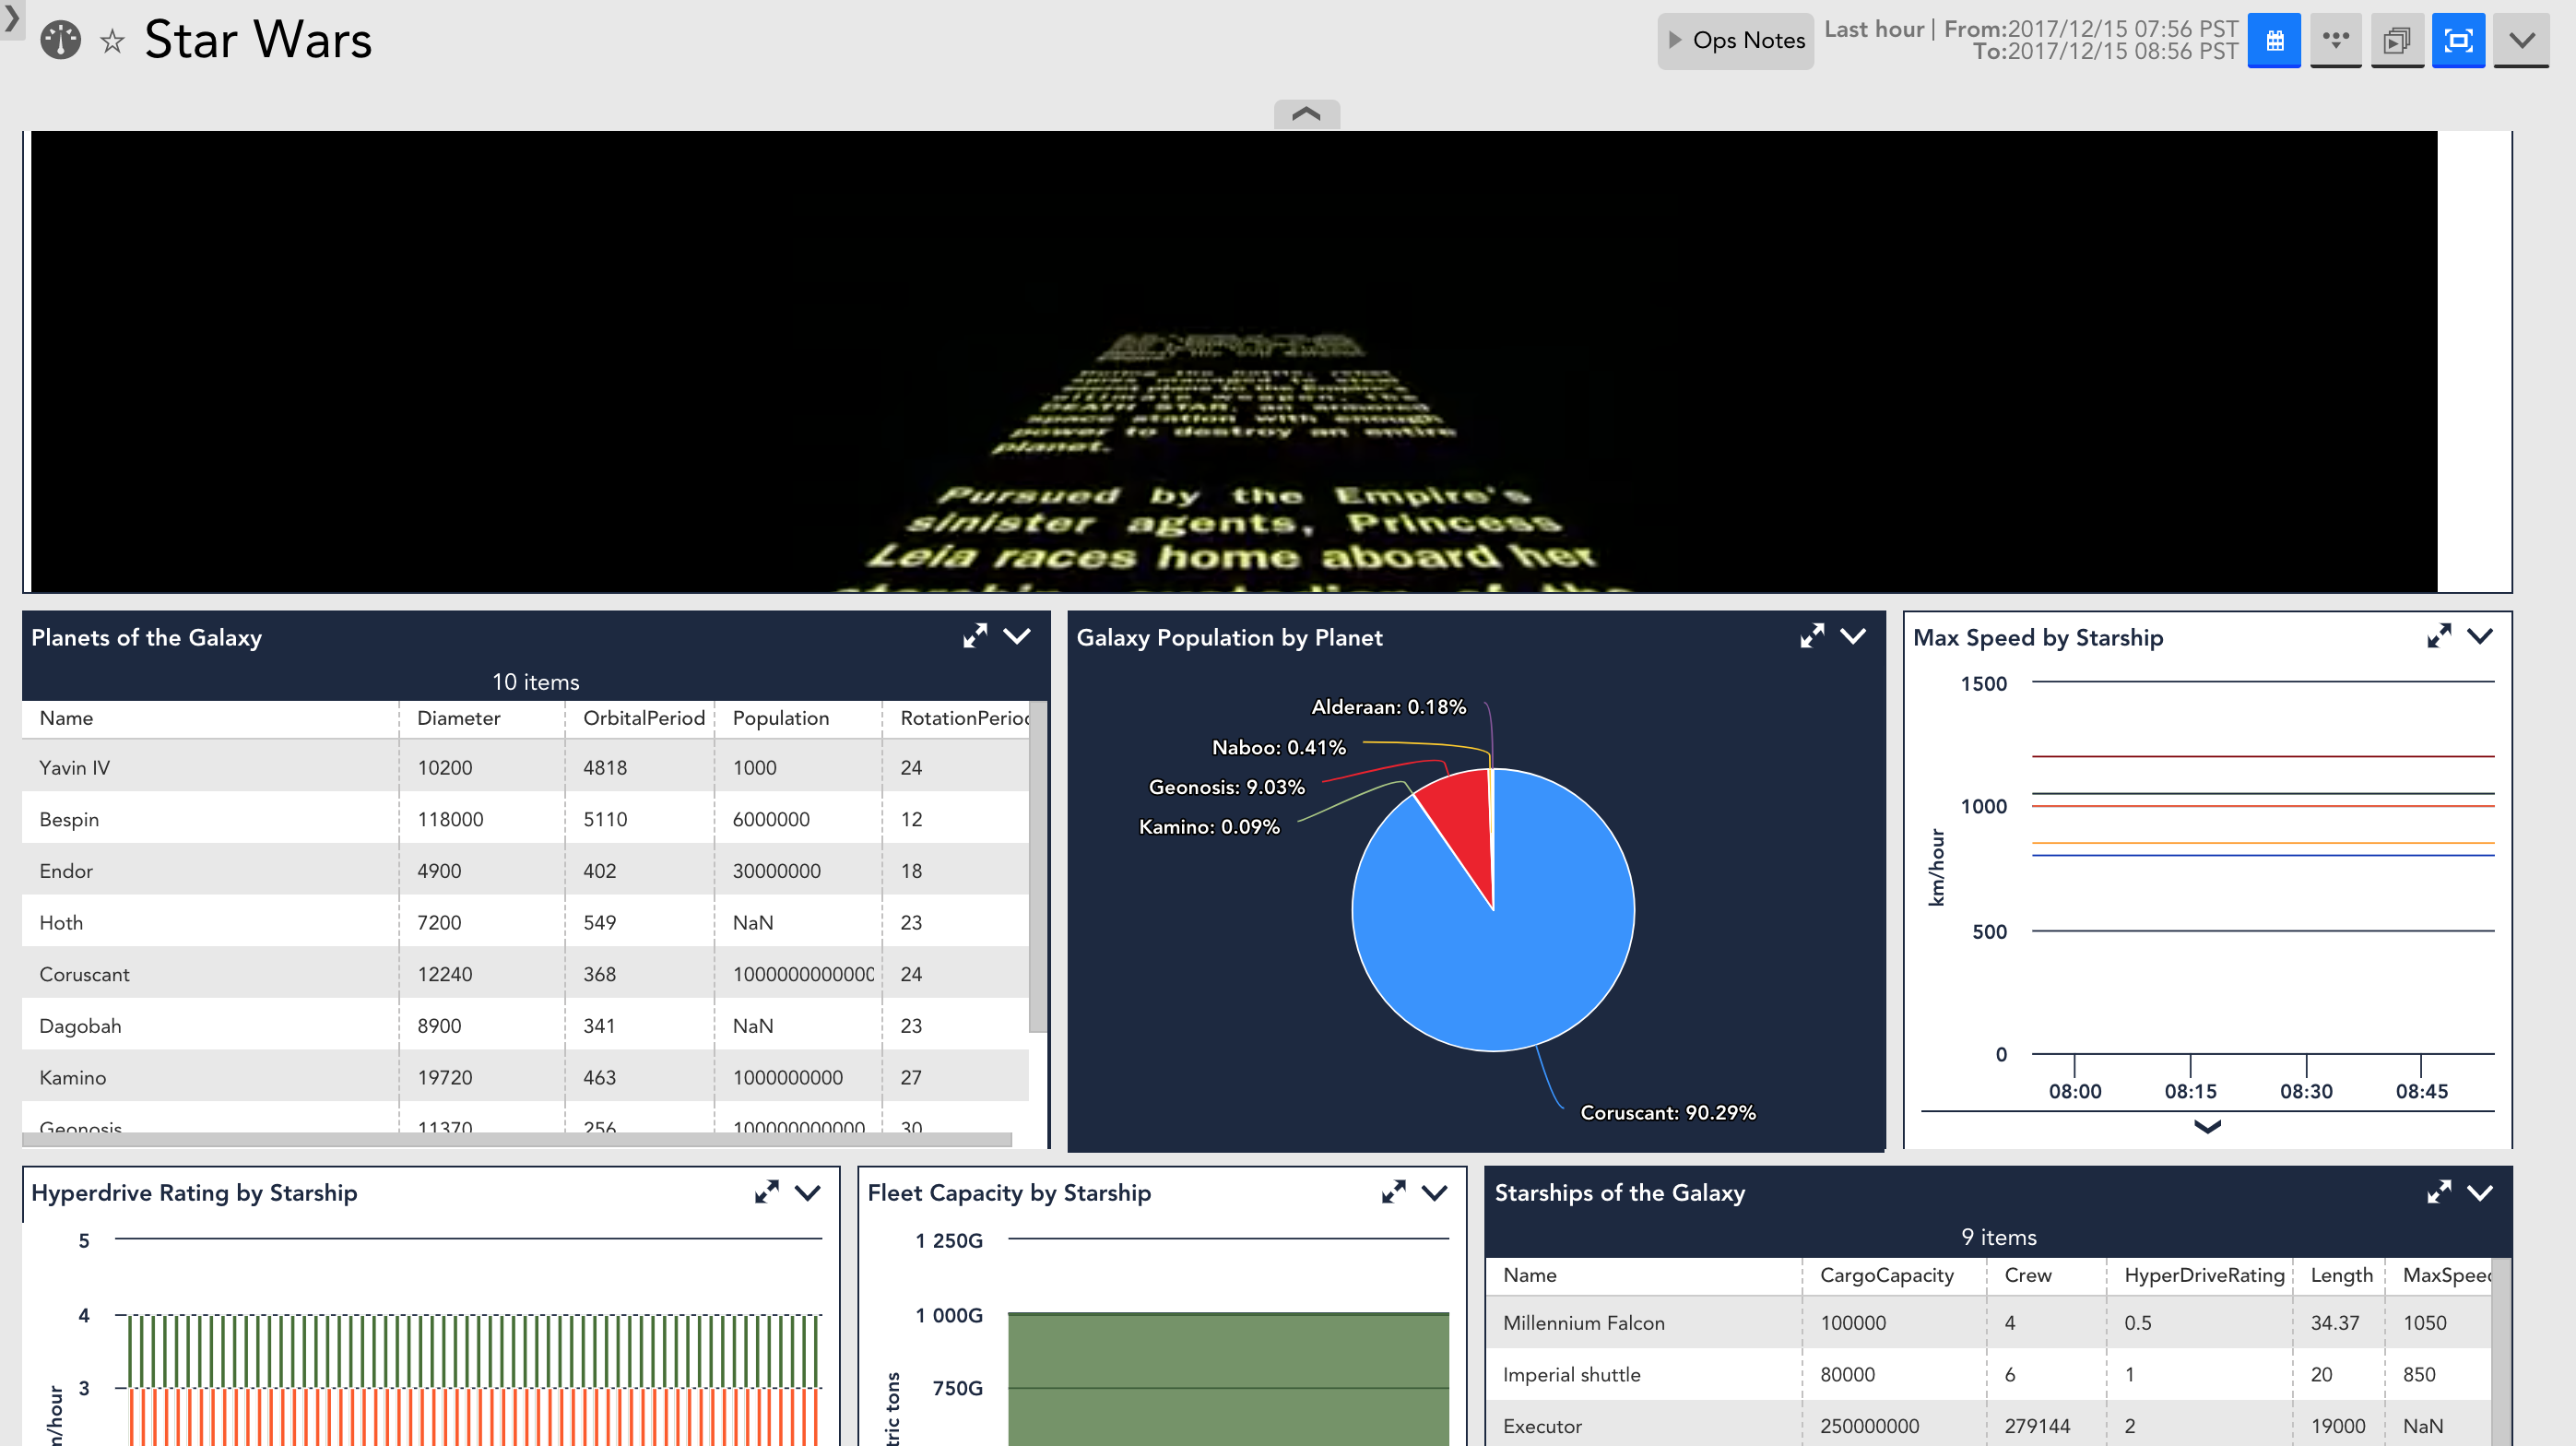 Second place dashboard LogicWars submission